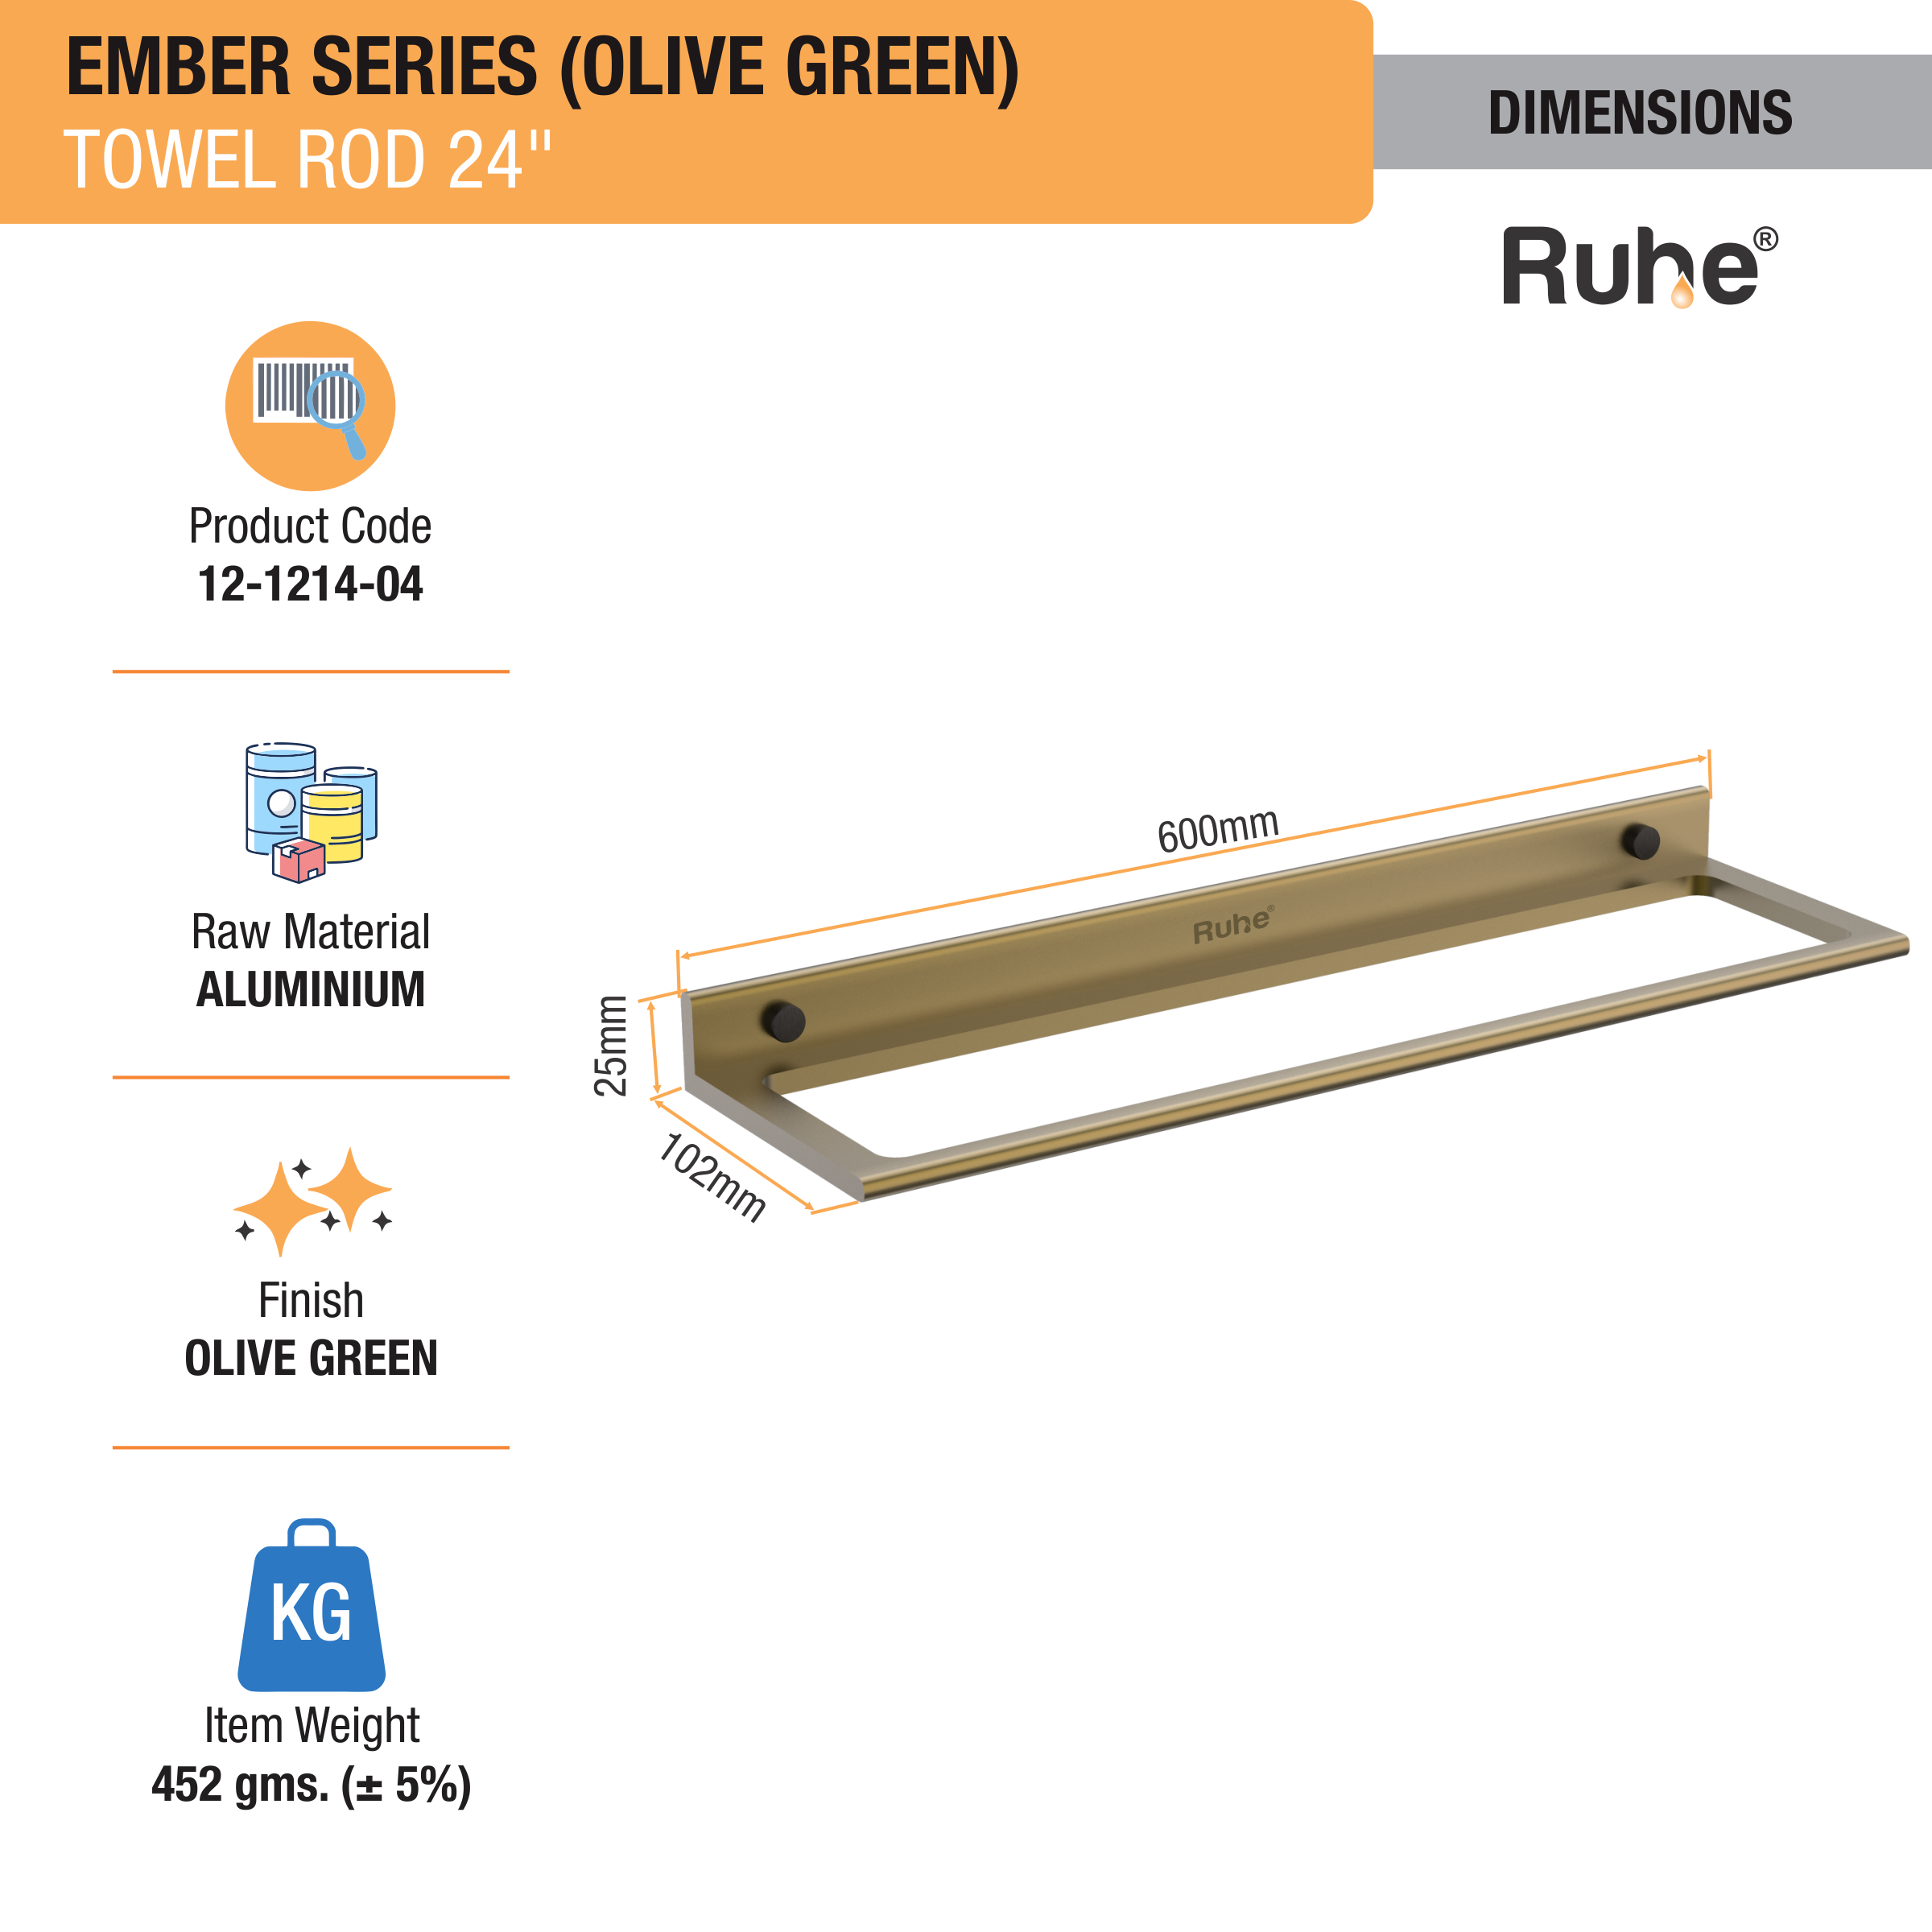 Ember Olive Green Towel Rod (Space Aluminium) dimensions and sizes